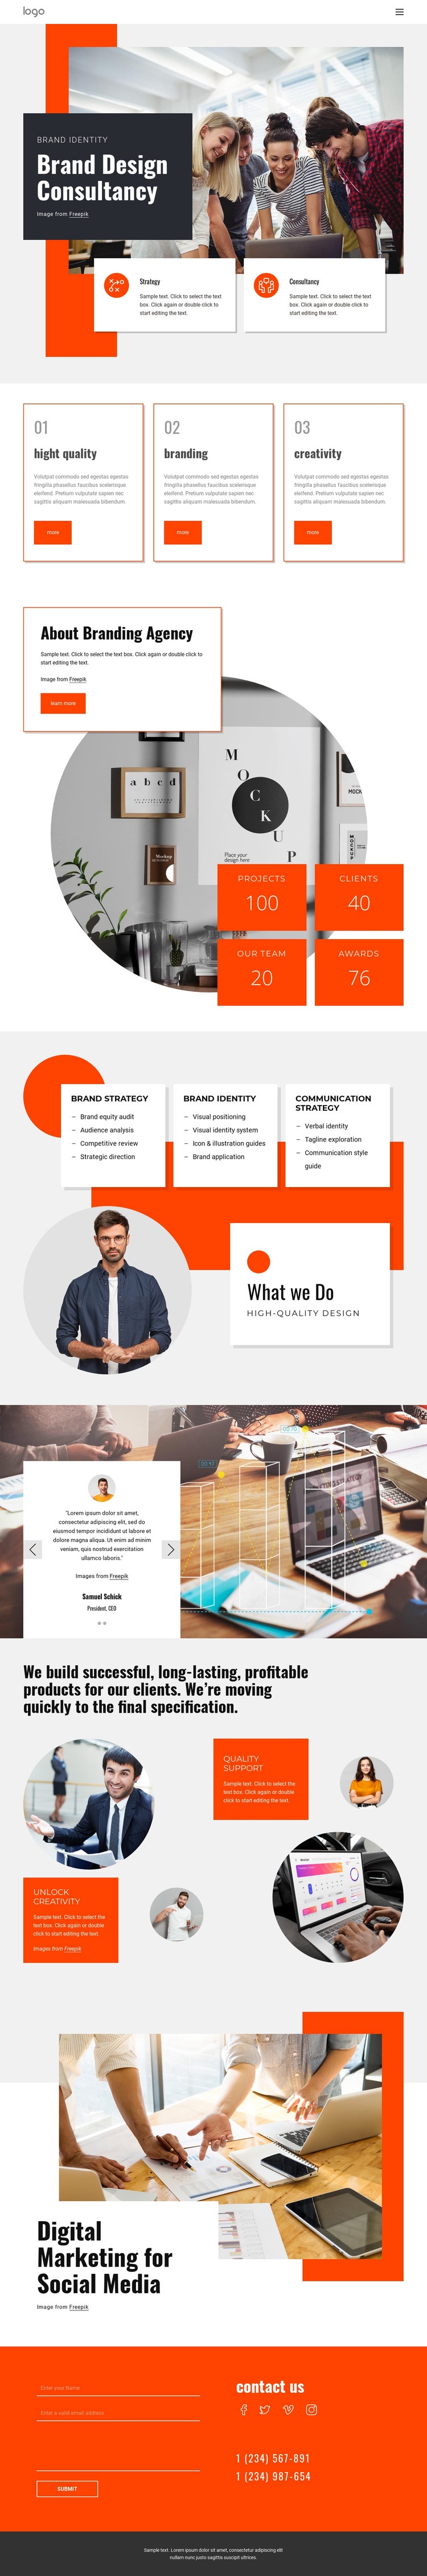 Growth design agency Web Page Design